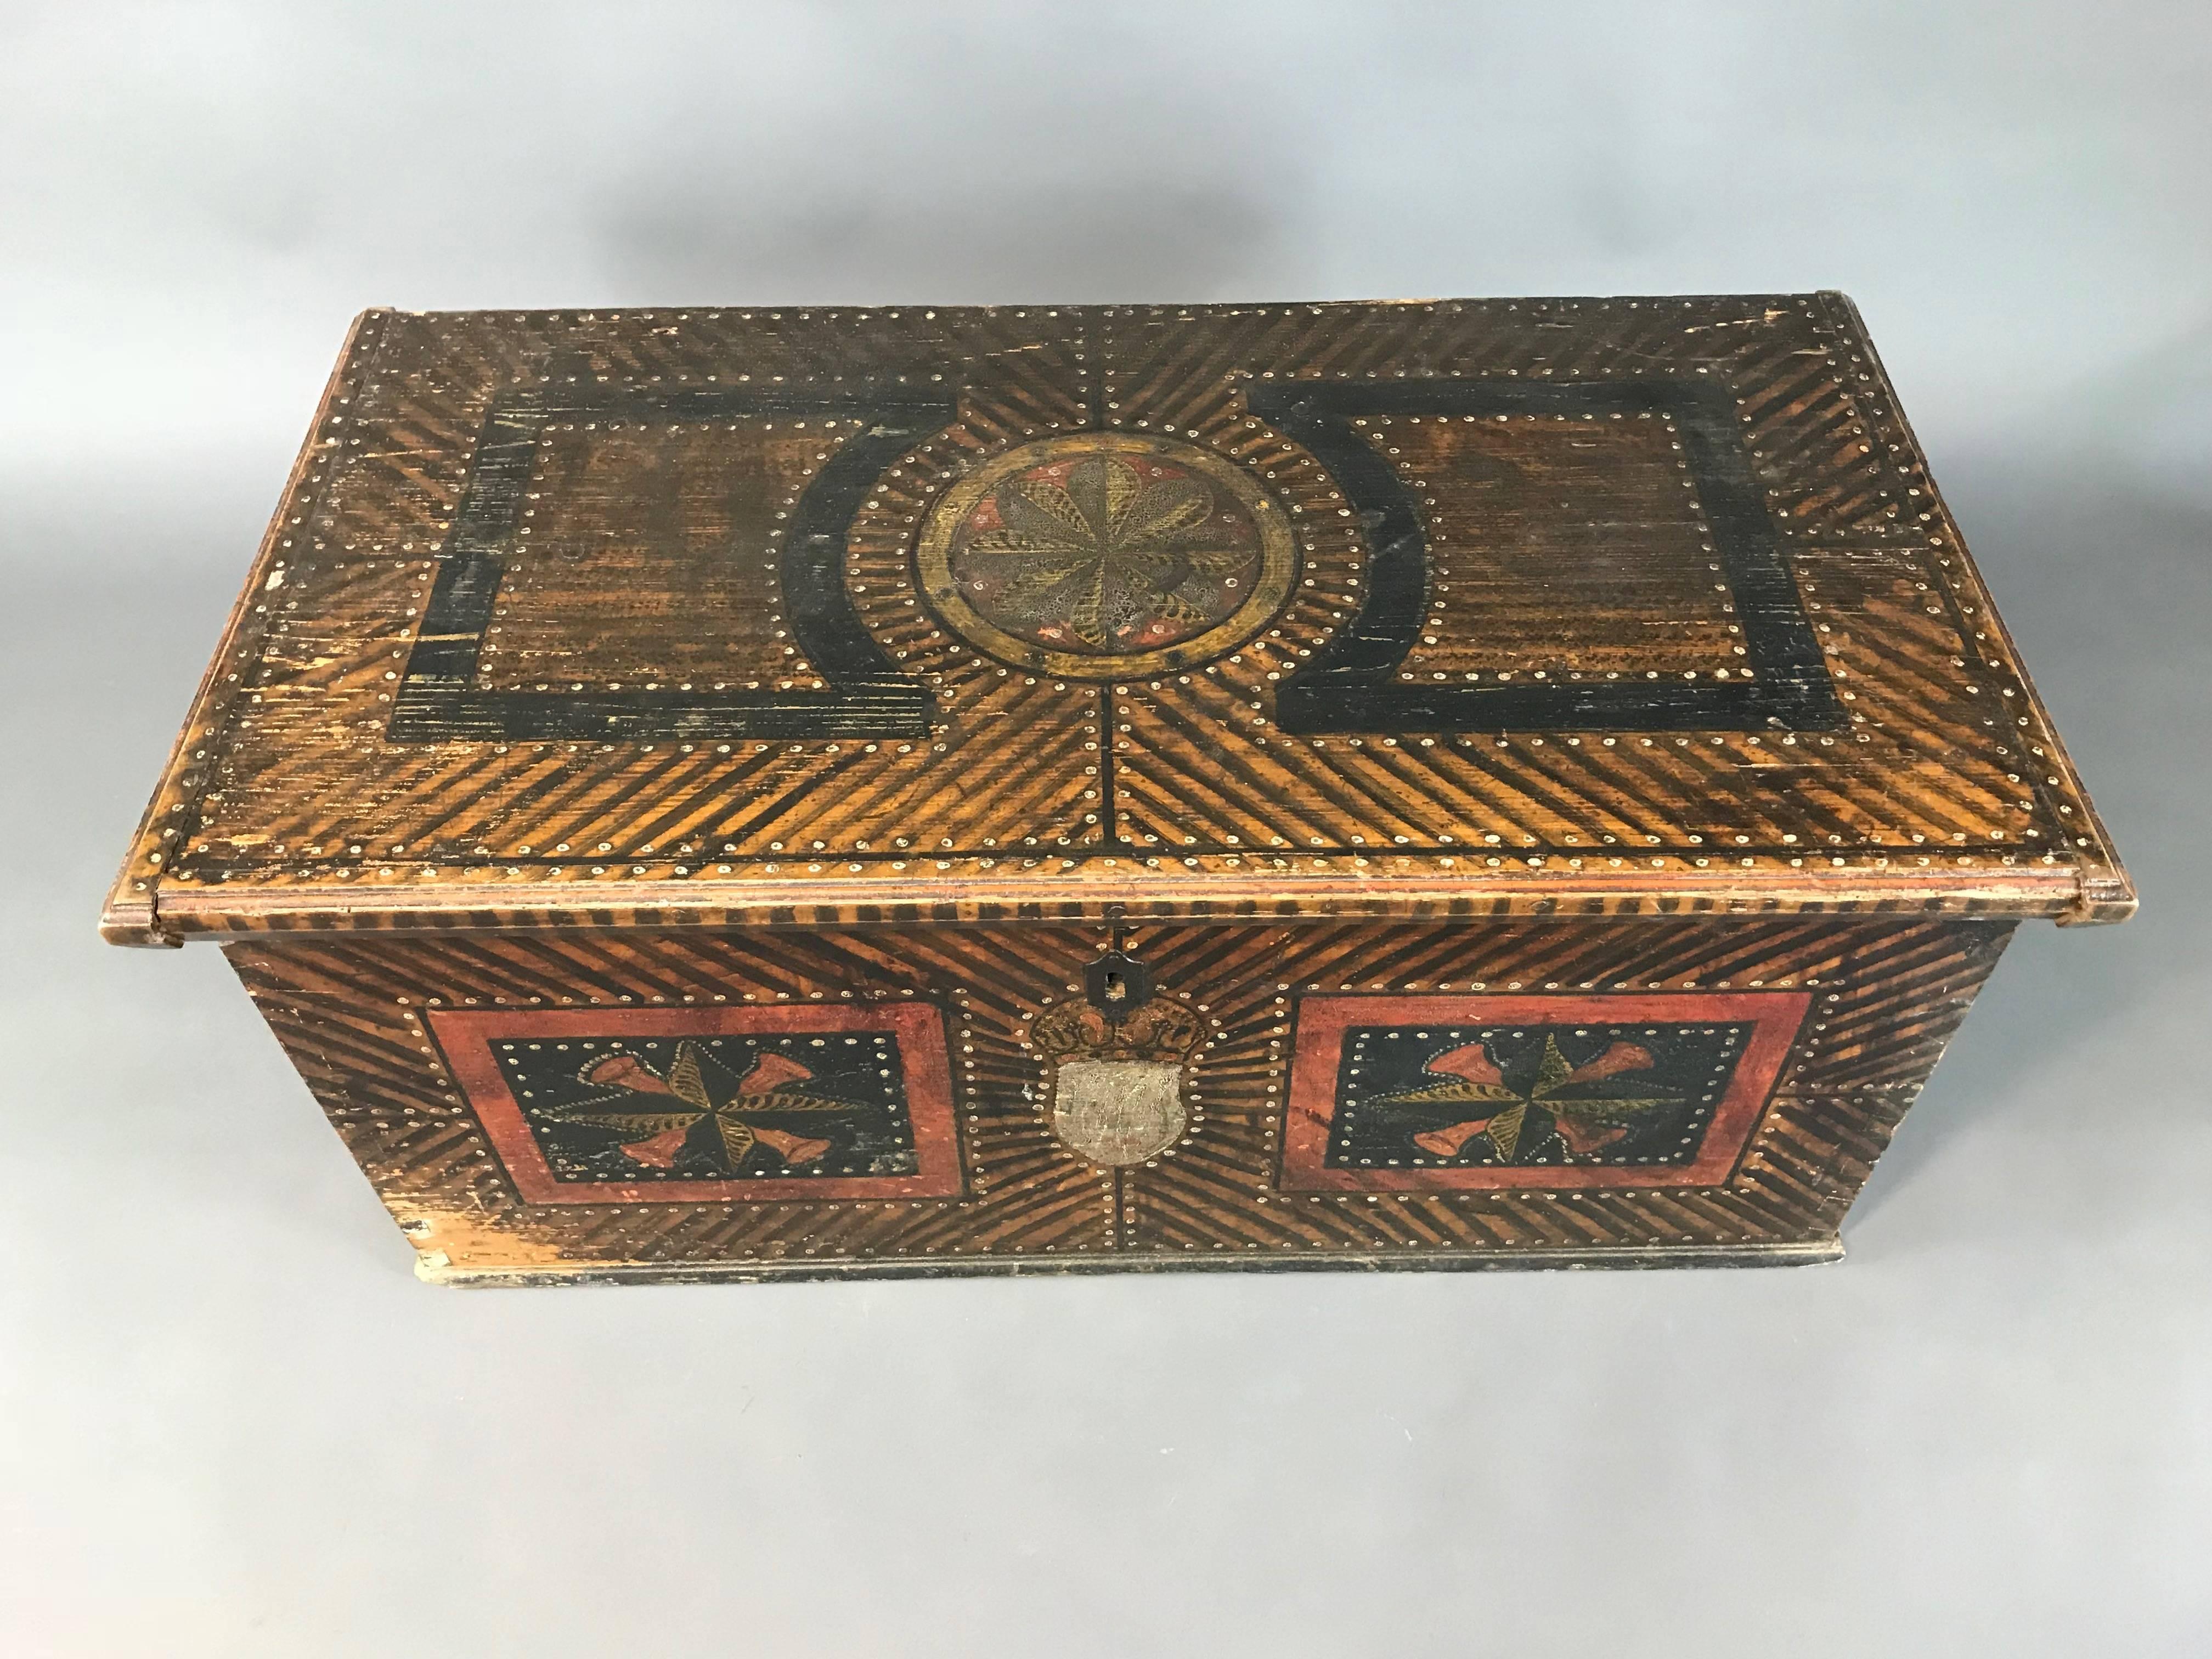 Antique Folk Art painted marriage chest

Central European, circa 1820

Pine painted chest with candle box, original strap hinges and carrying handles.

The lock has been removed.

Condition: Very good, some age related wear.